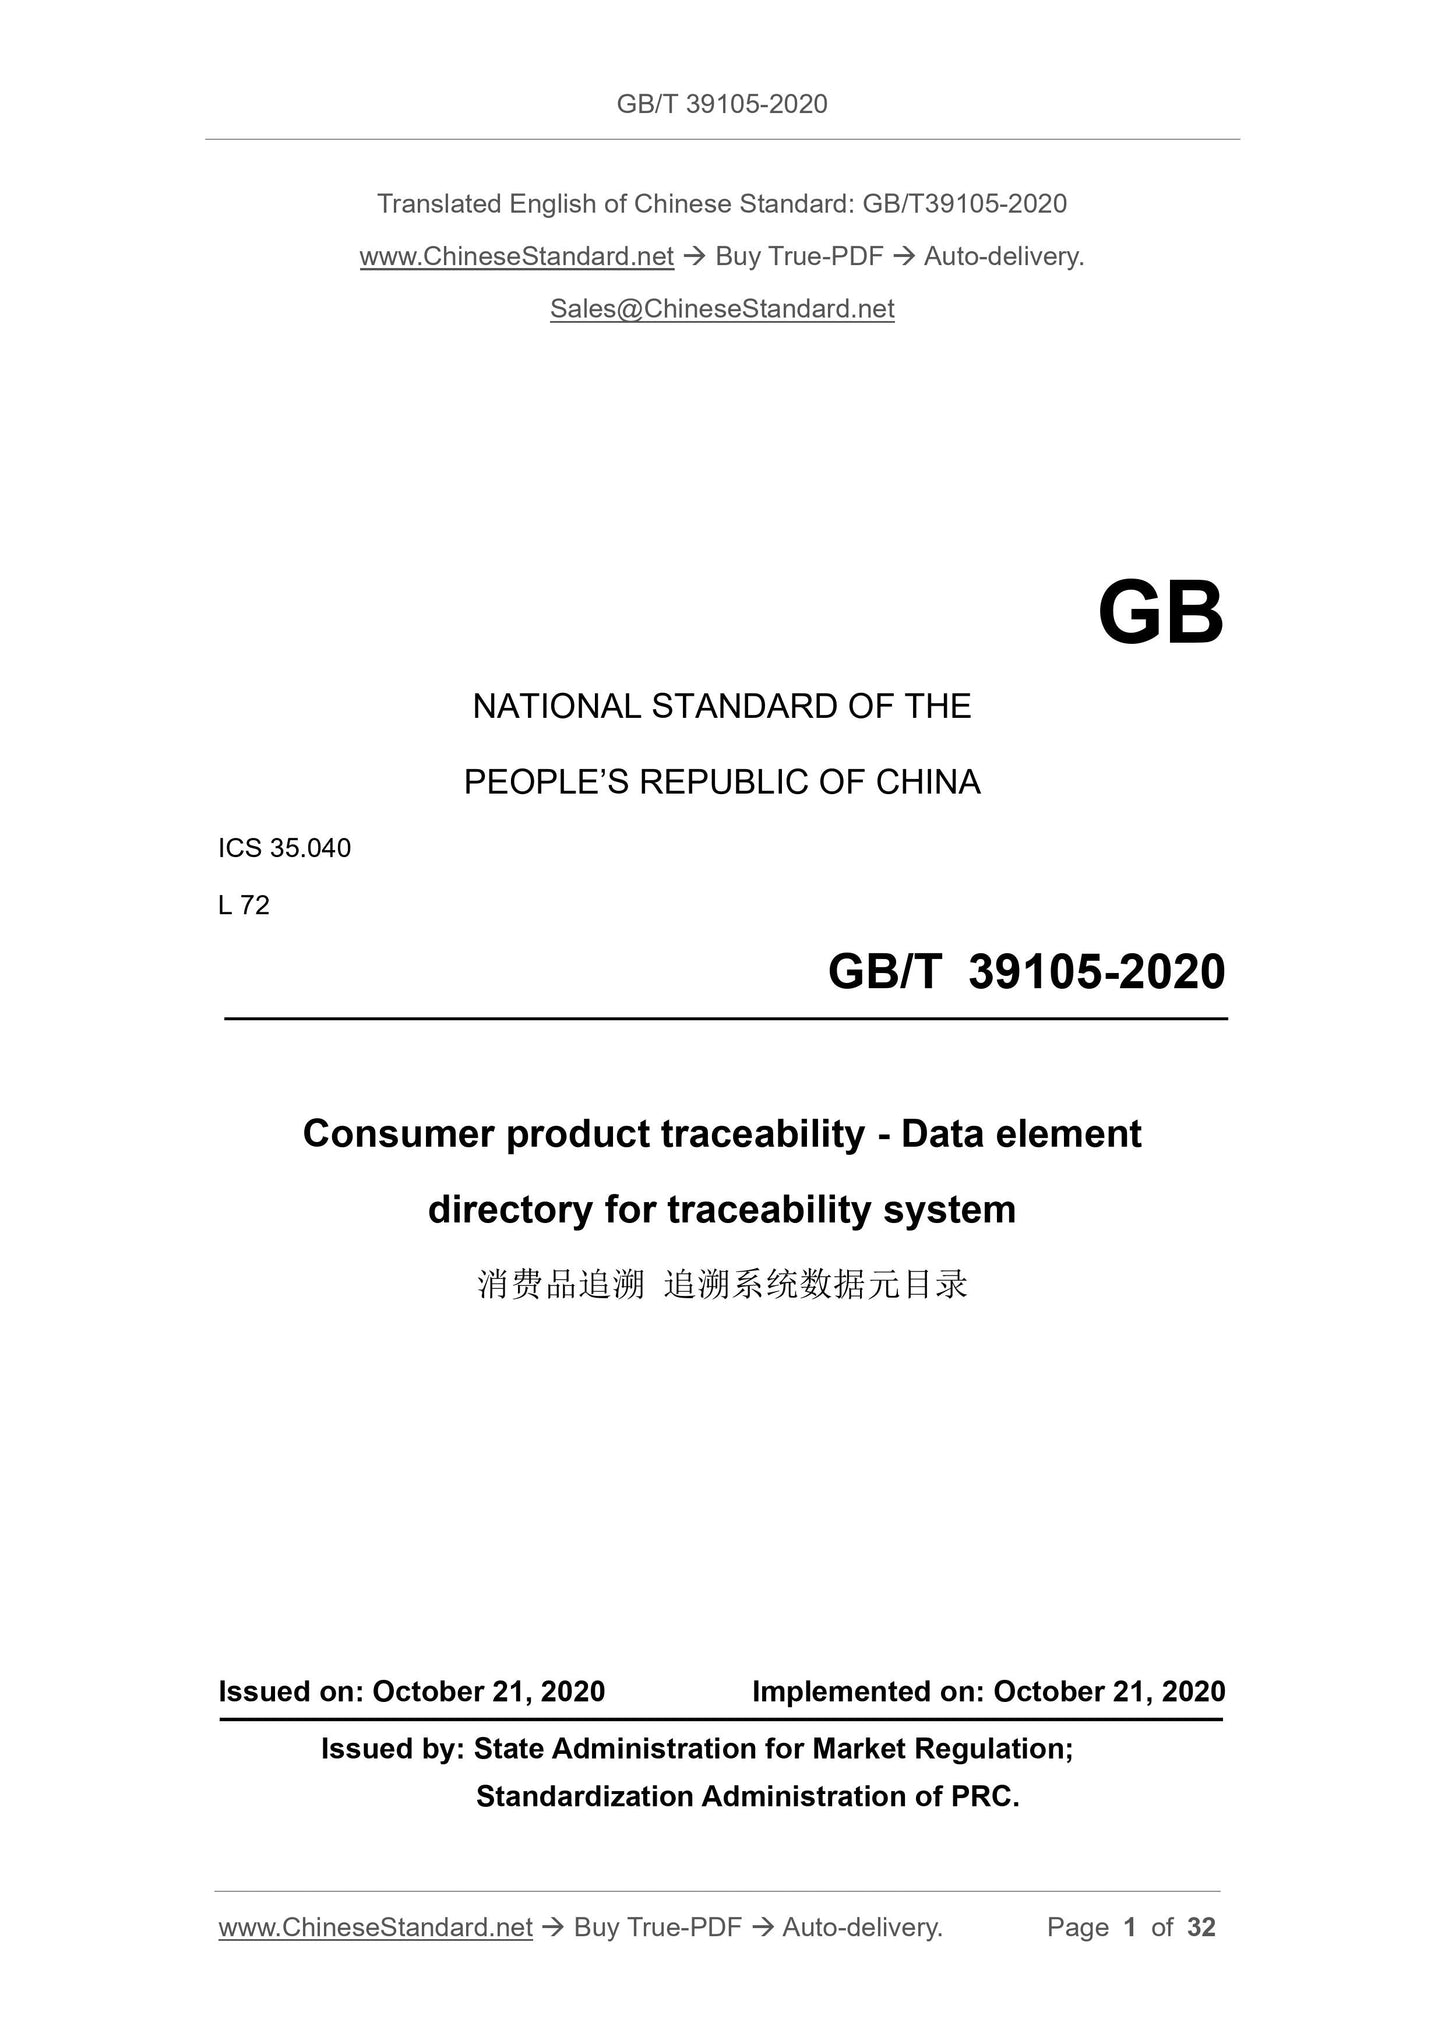 GB/T 39105-2020 Page 1